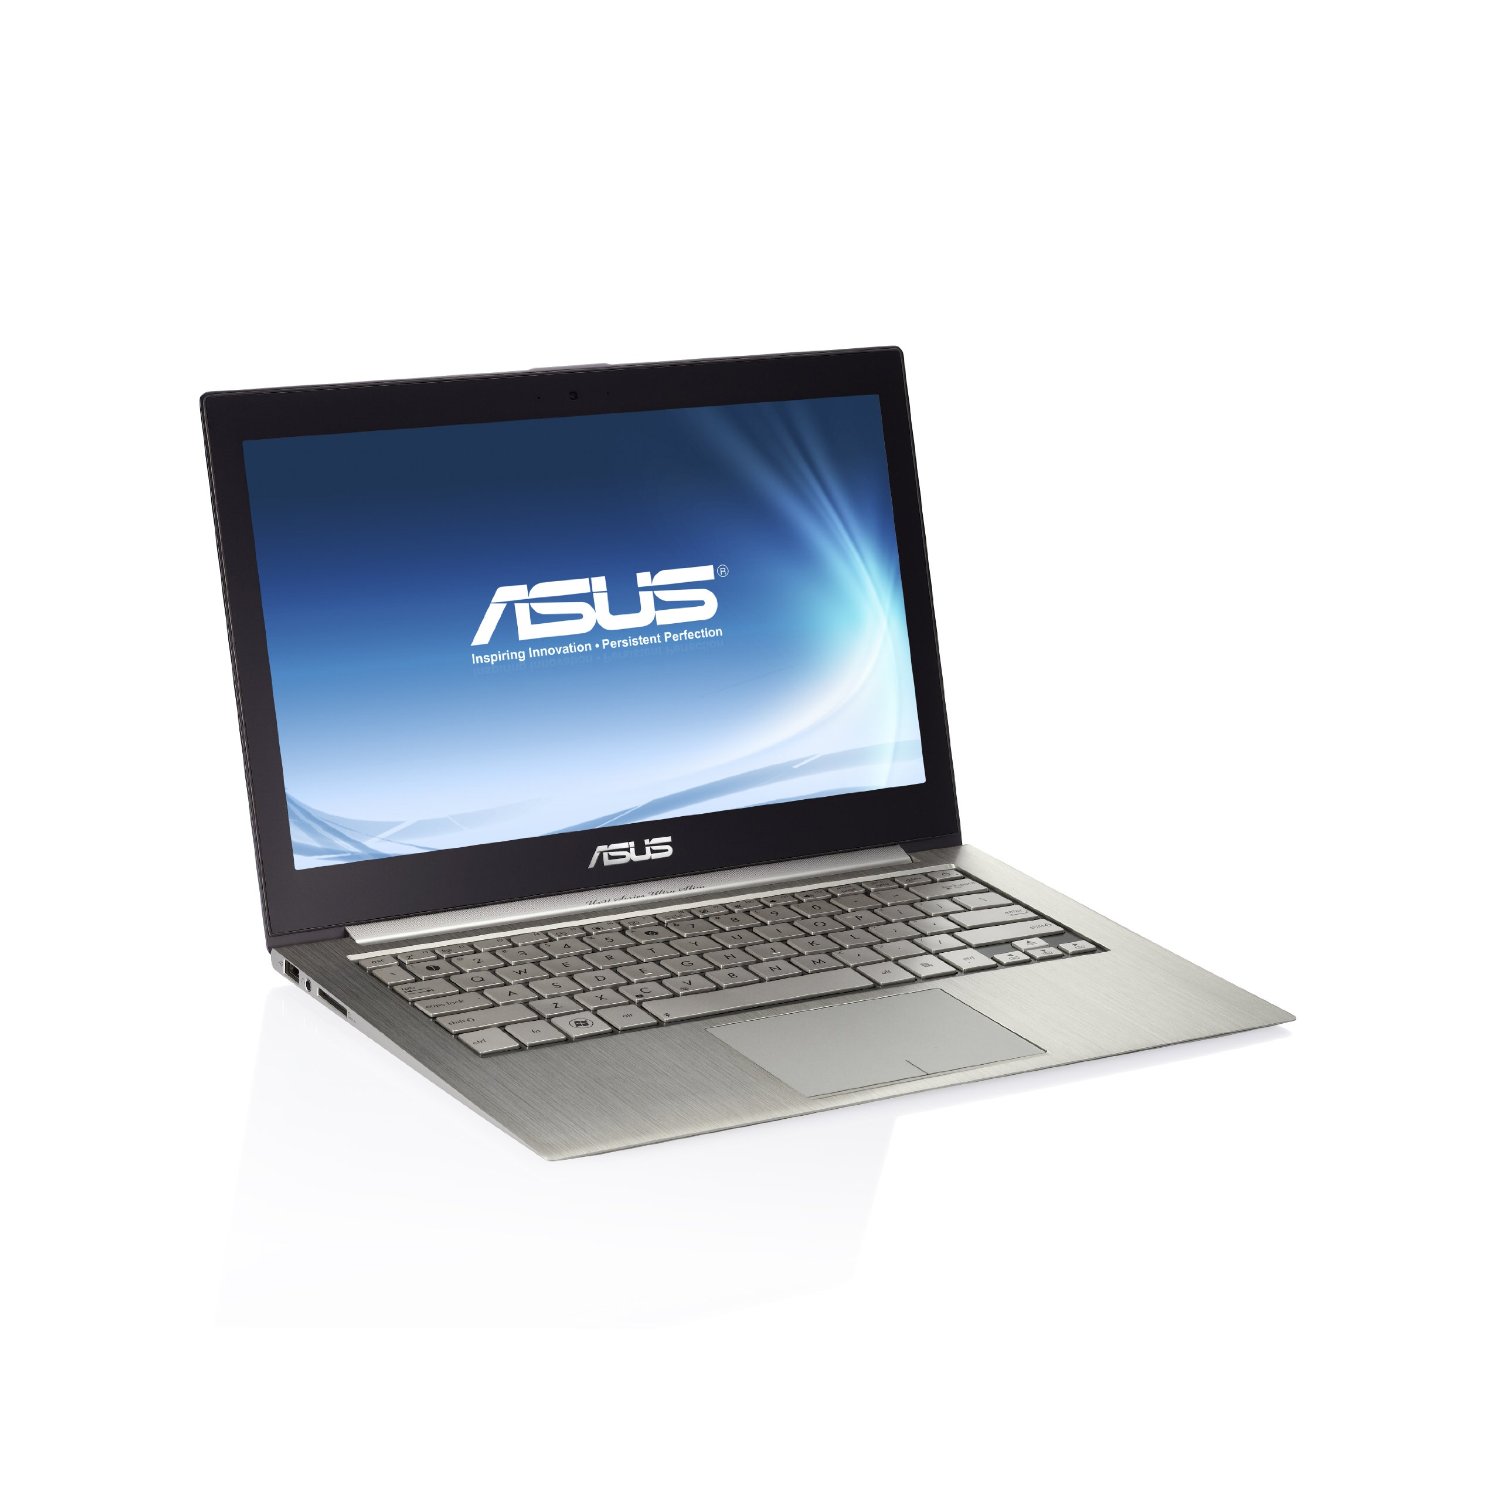 http://thetechjournal.com/wp-content/uploads/images/1111/1322100736-asus-zenbook-ux31edh72-133inch-thin-and-light-ultrabook-5.jpg